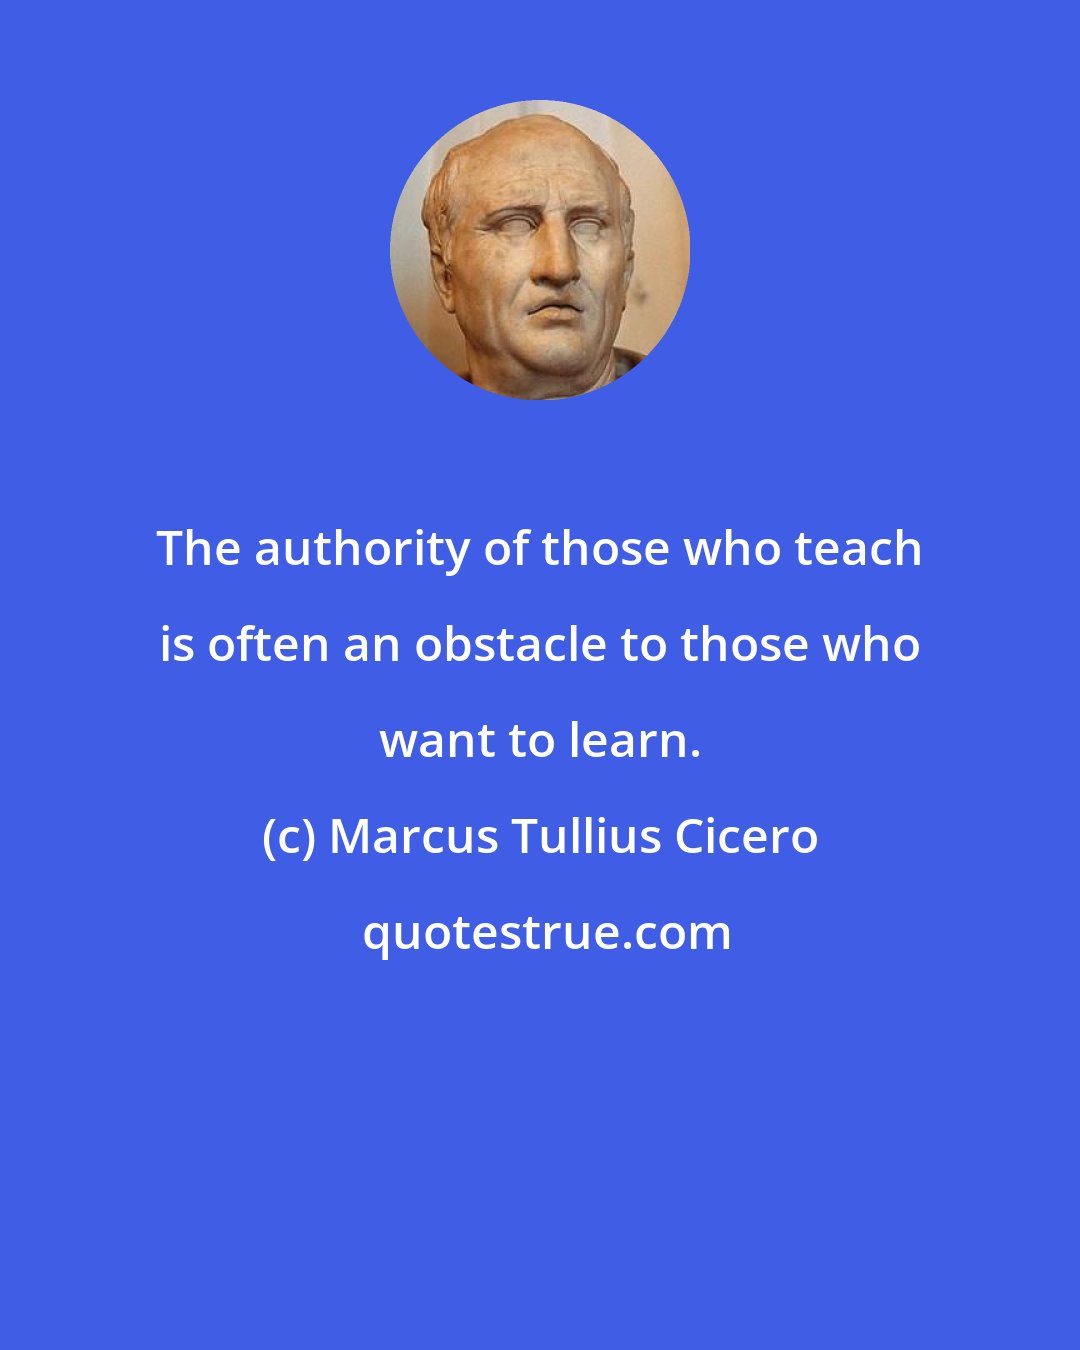 Marcus Tullius Cicero: The authority of those who teach is often an obstacle to those who want to learn.